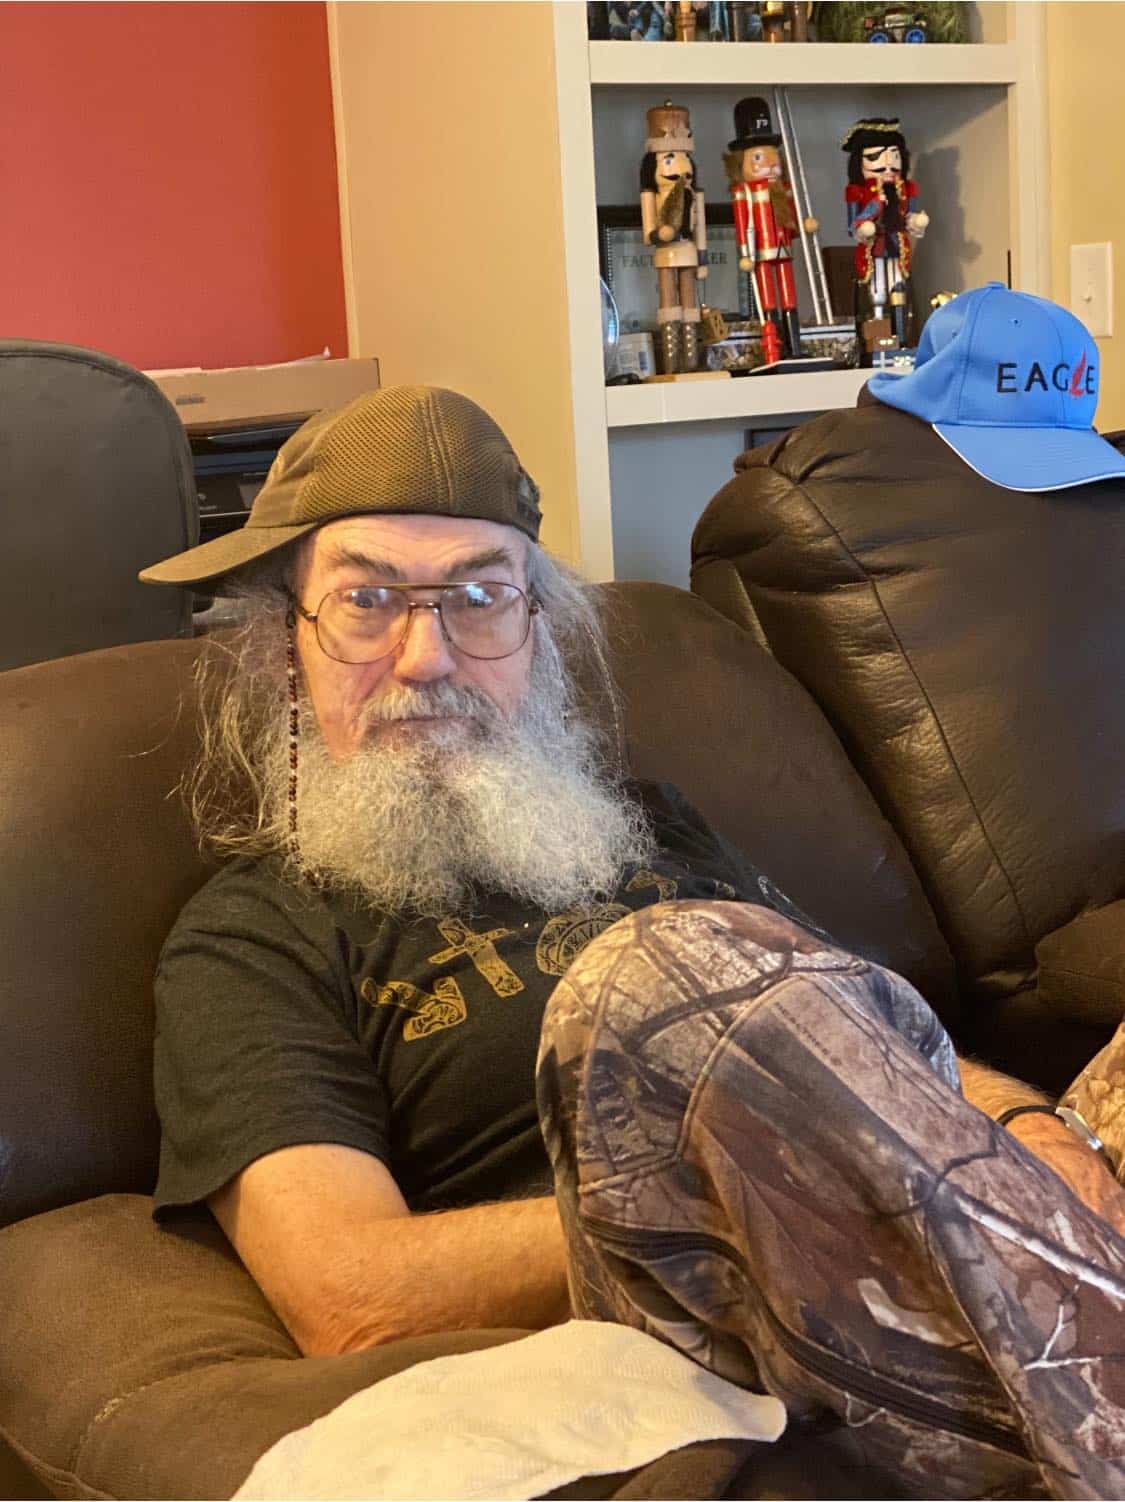 Uncle Si of Duck Dynasty fame shared a photo of what he looked like as a teenager